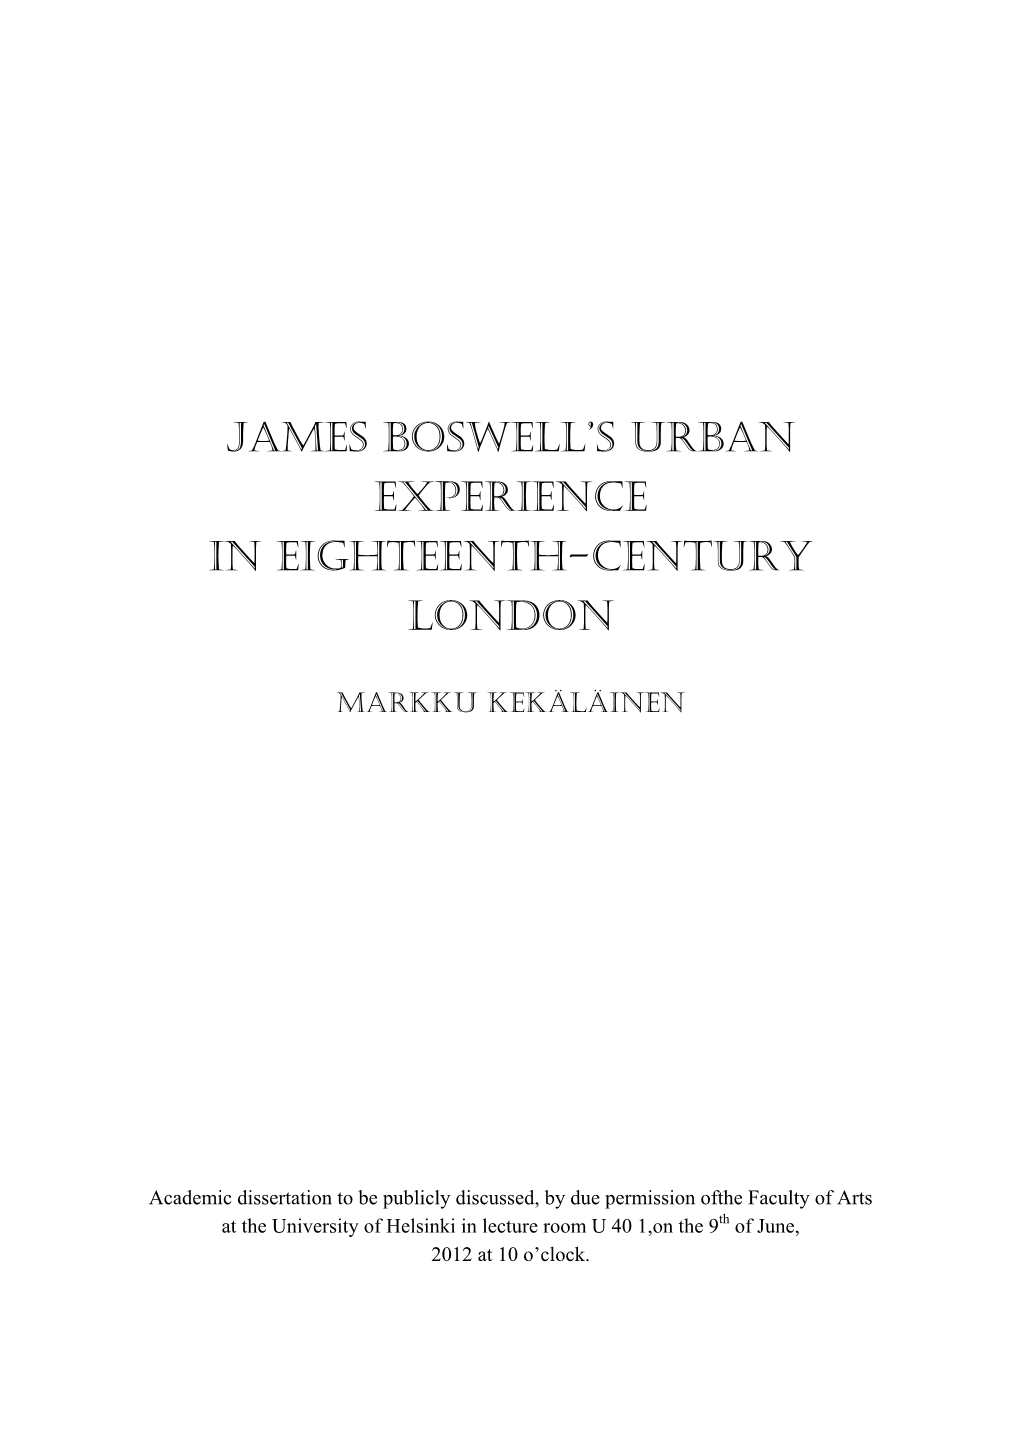 James Boswell's Urban Experience in Eighteenth-Century London